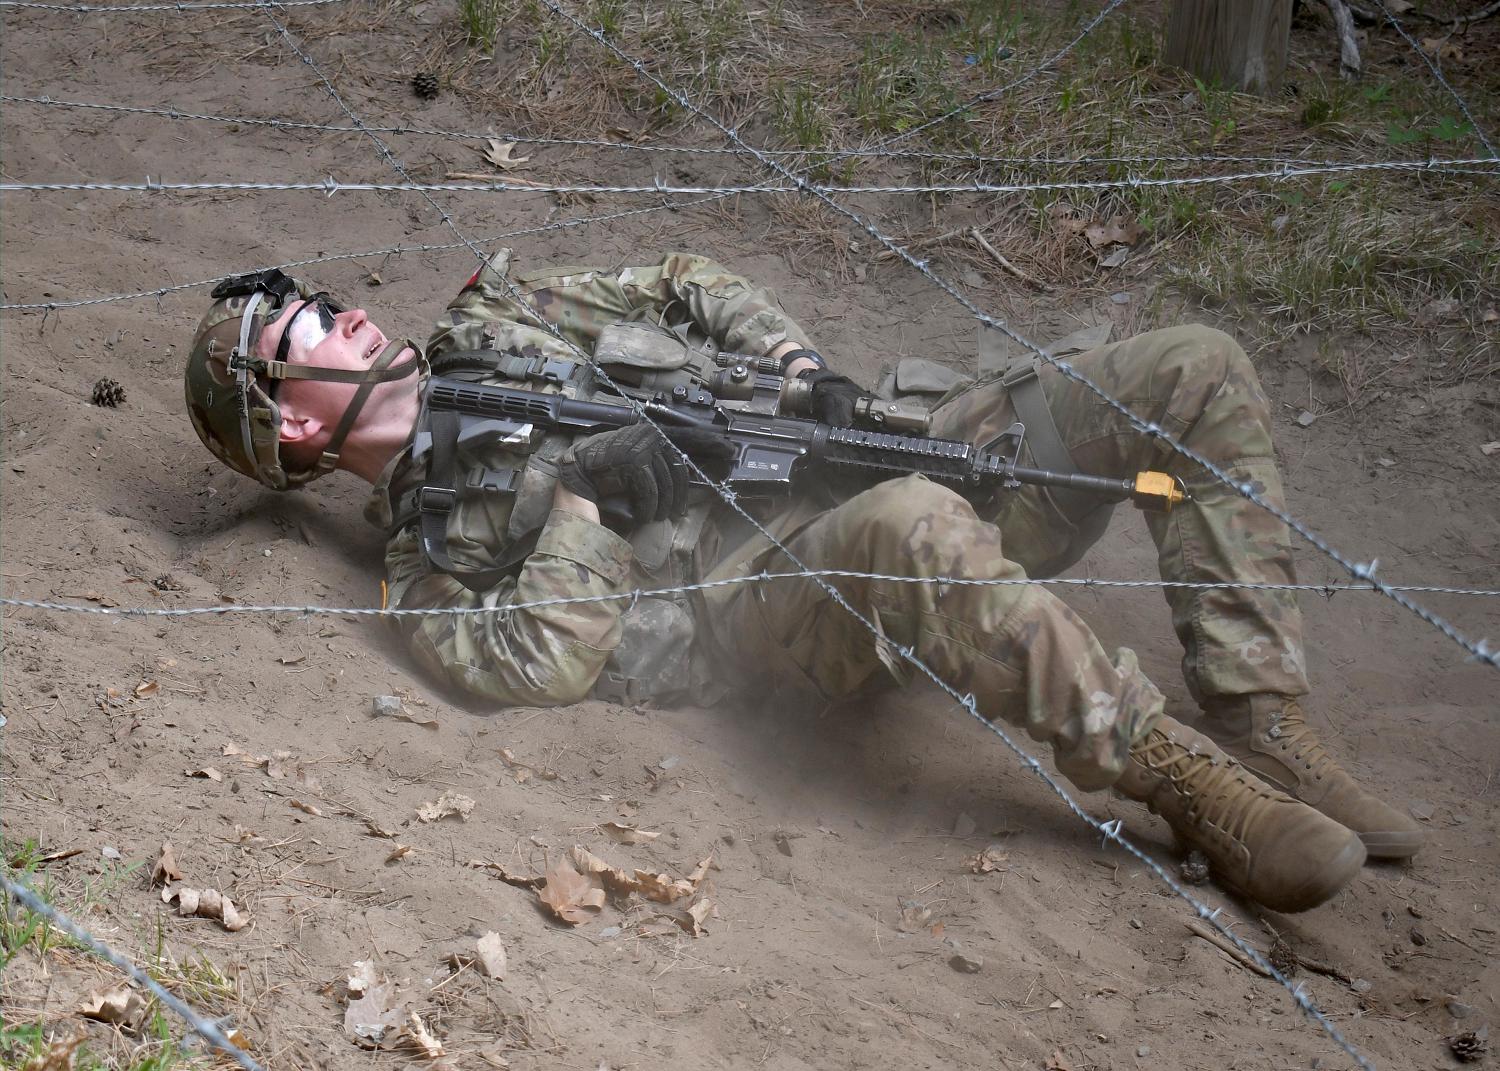 FORT DRUM, N.Y. – U.S. Army Sgt. Klayton McCallum, a combat medic with the New York National Guard’s 2nd Battalion, 108th Infantry Regiment, navigates a barbed wire obstacle during the 10th Mountain Division Expert Field Medical Badge assessment at Fort Drum, N.Y., May 20, 2021. (photo by Sgt. 1st Class Warren W. Wright Jr., New York National Guard)